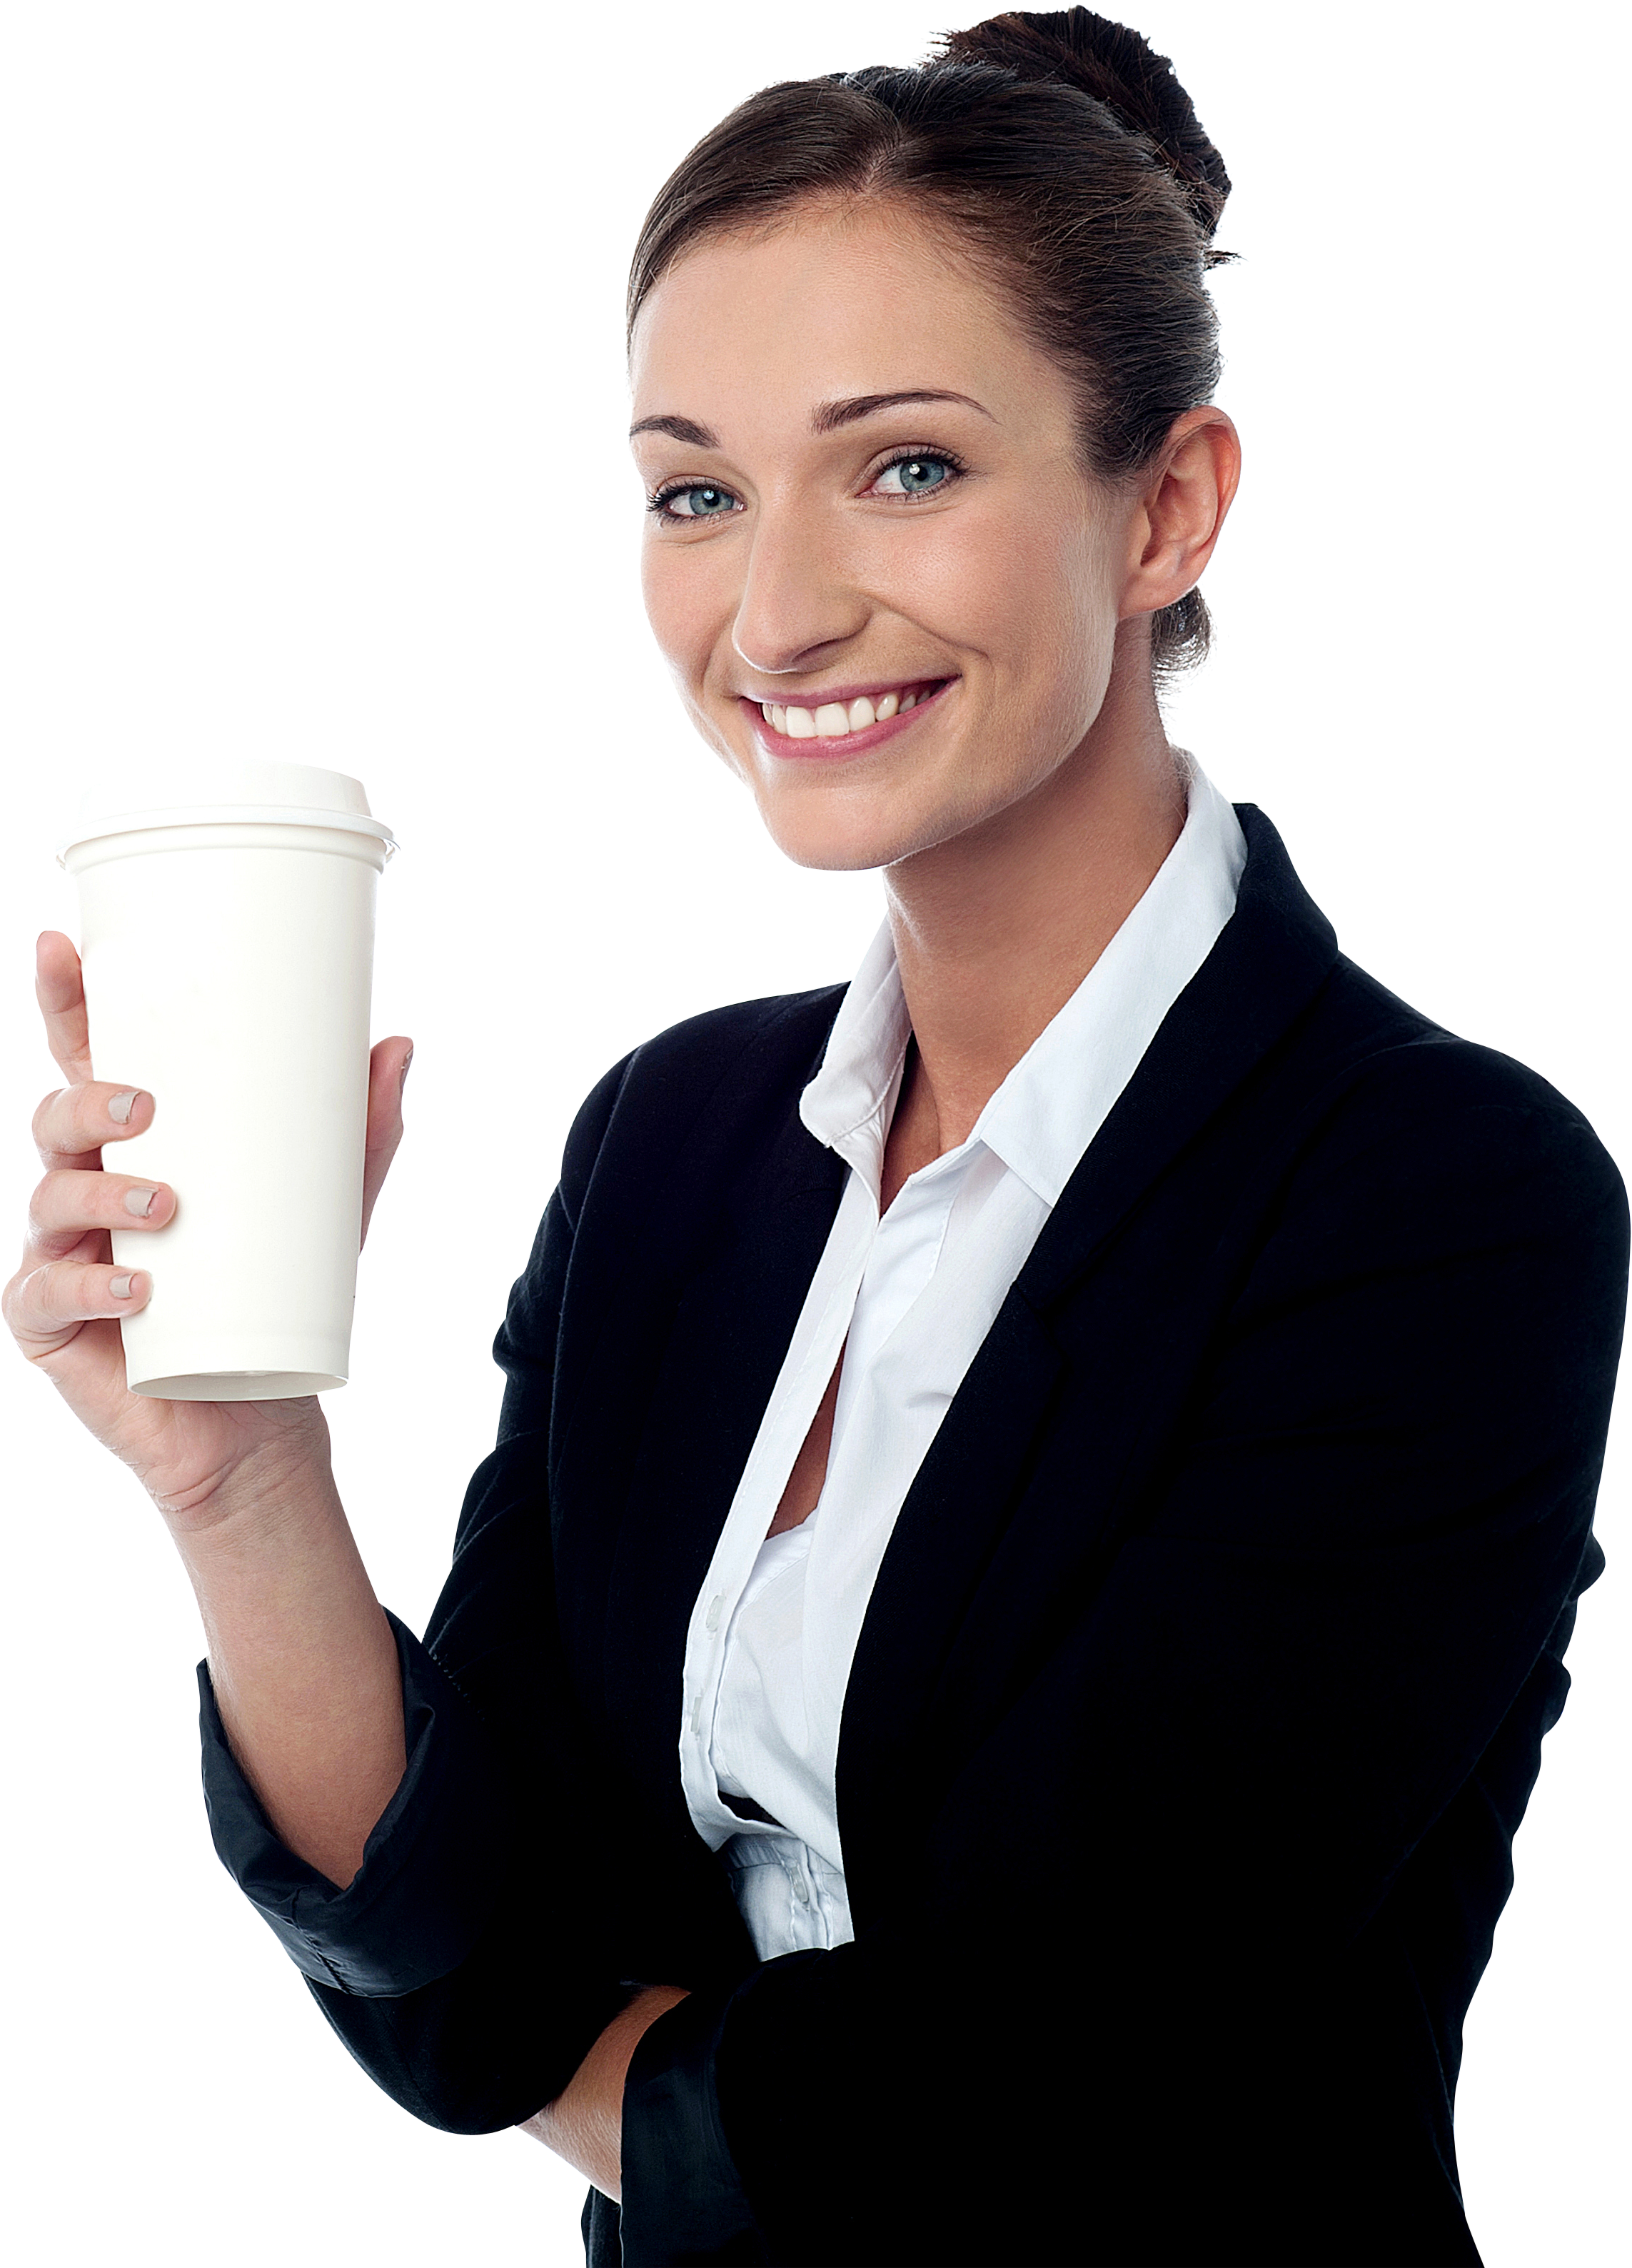 Smiling Woman Business HD Image Free PNG Image